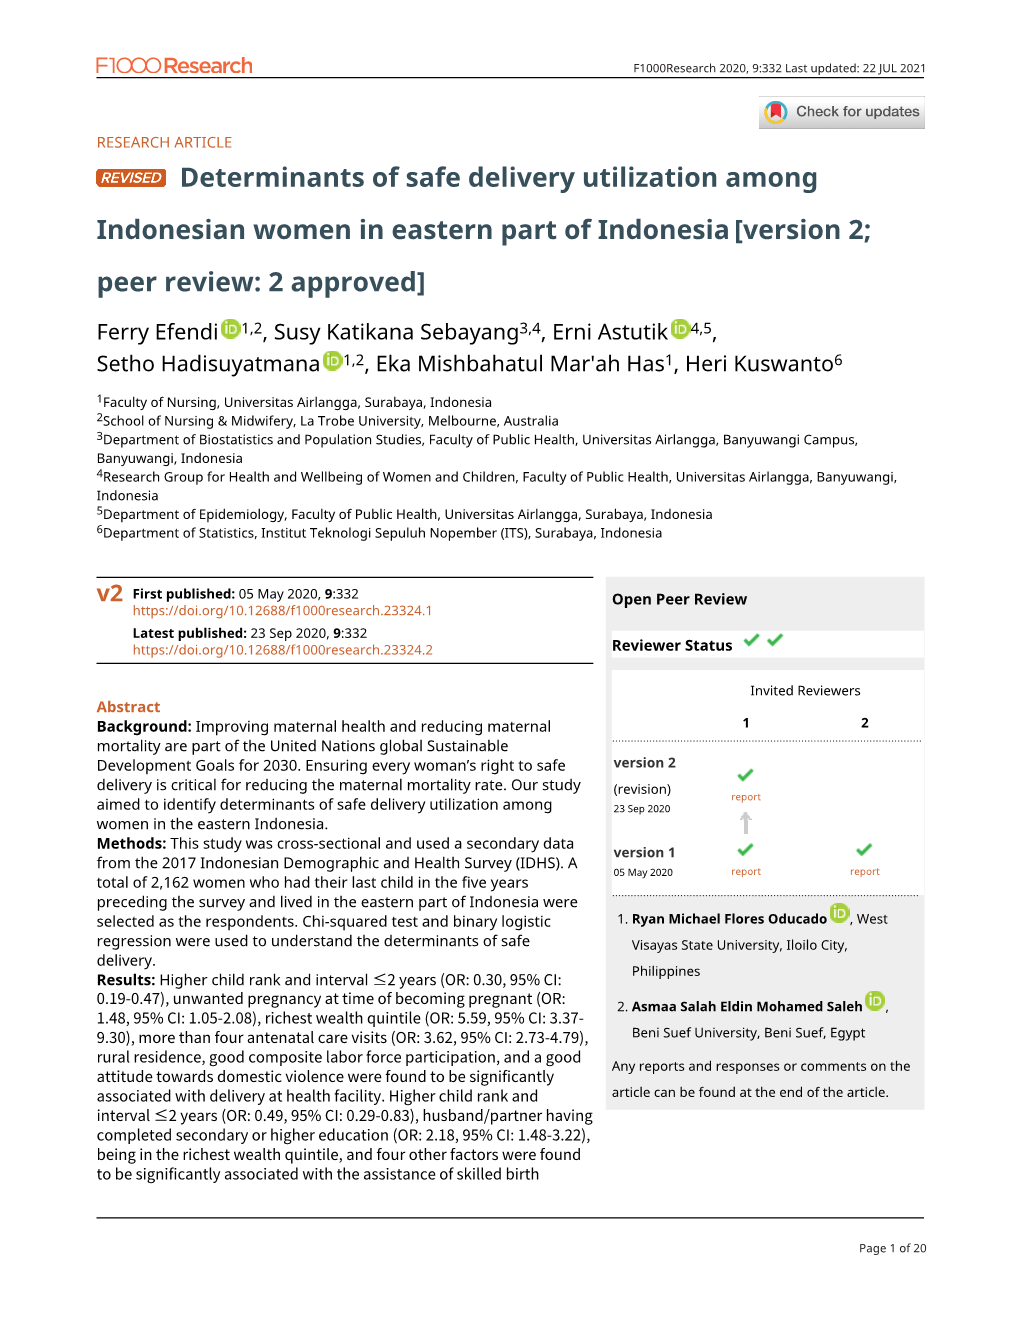 Determinants of Safe Delivery Utilization Among Indonesian